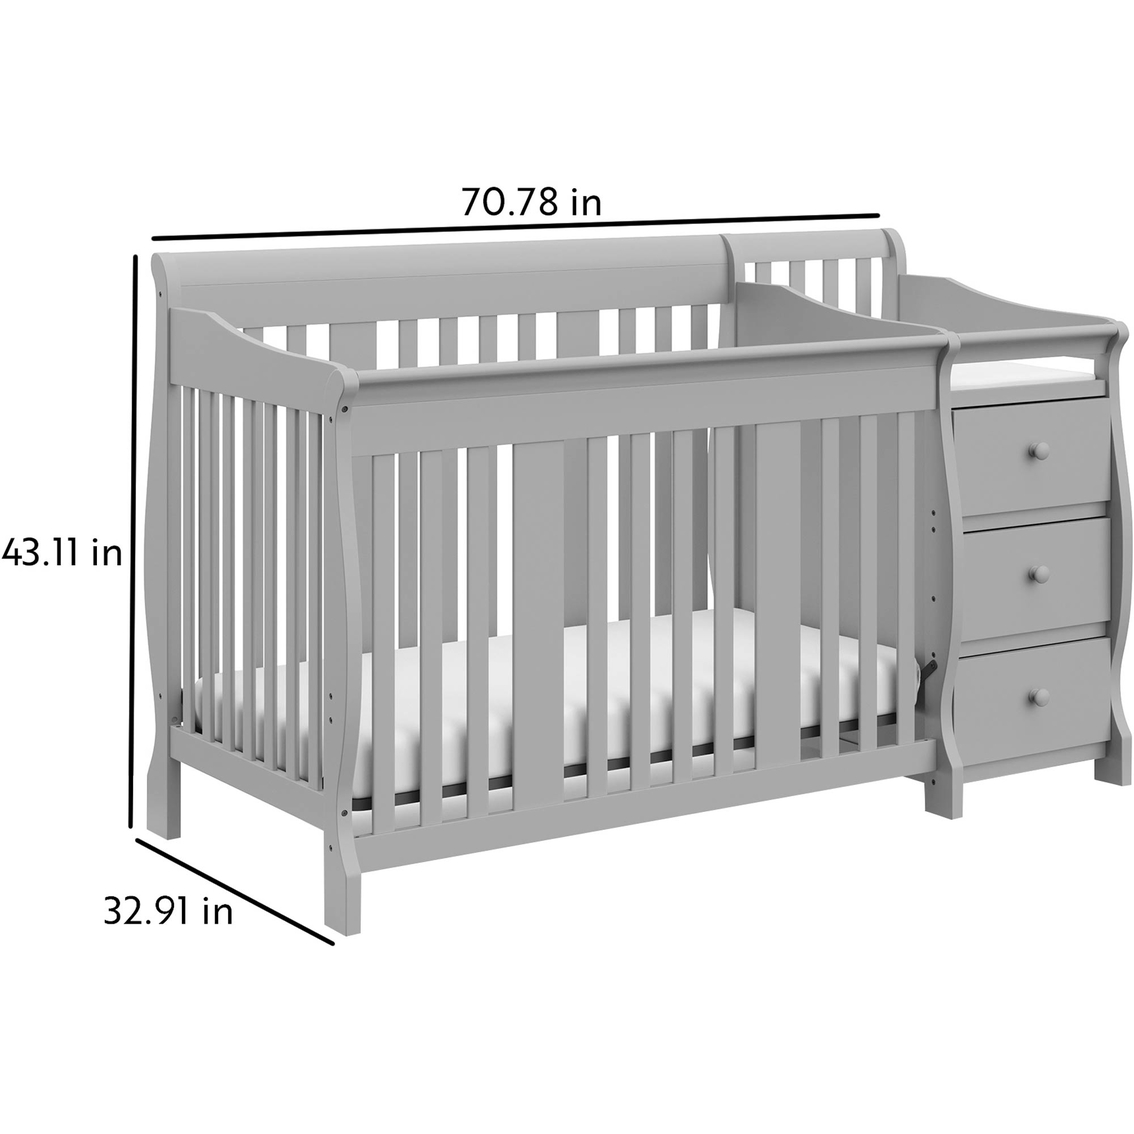 Storkcraft Portofino 4 in 1 Convertible Crib and Changer - Image 9 of 9